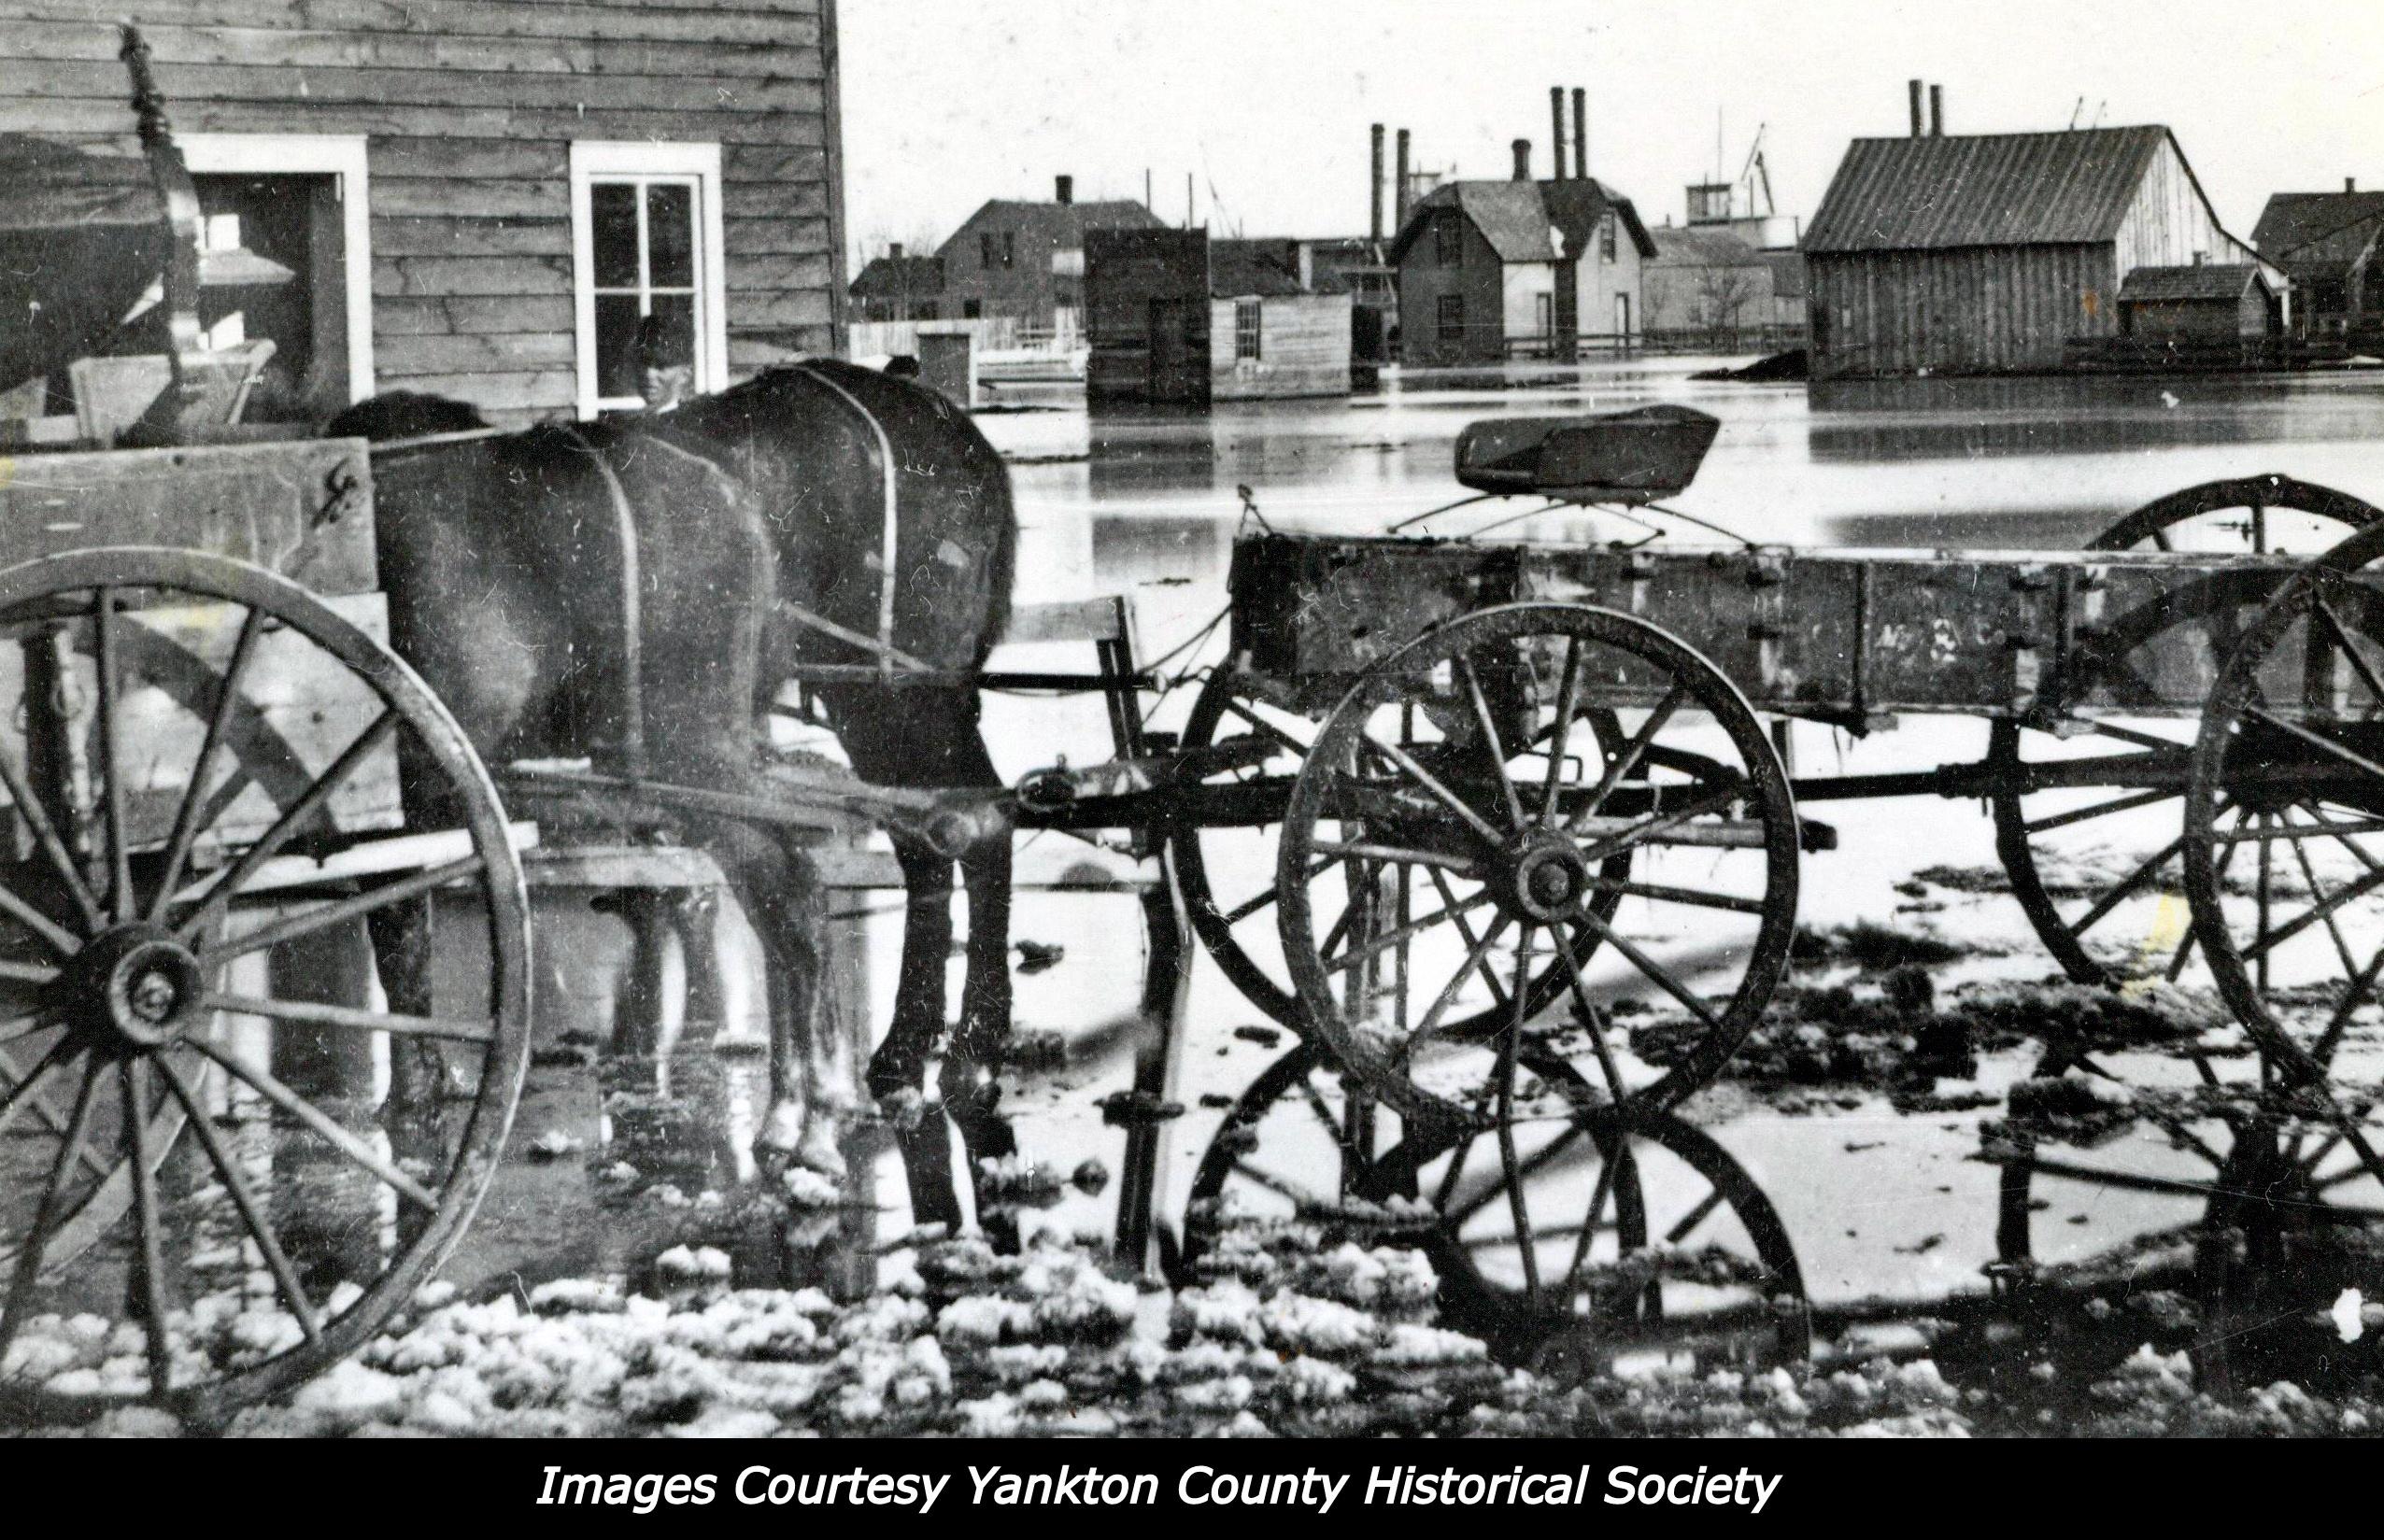 Archival photo of the 1881 flood in Yankton. There is a horse and wagon in the foreground with many buildings in the background. The horse, wagon, and buildings are surrounded by flood water. 